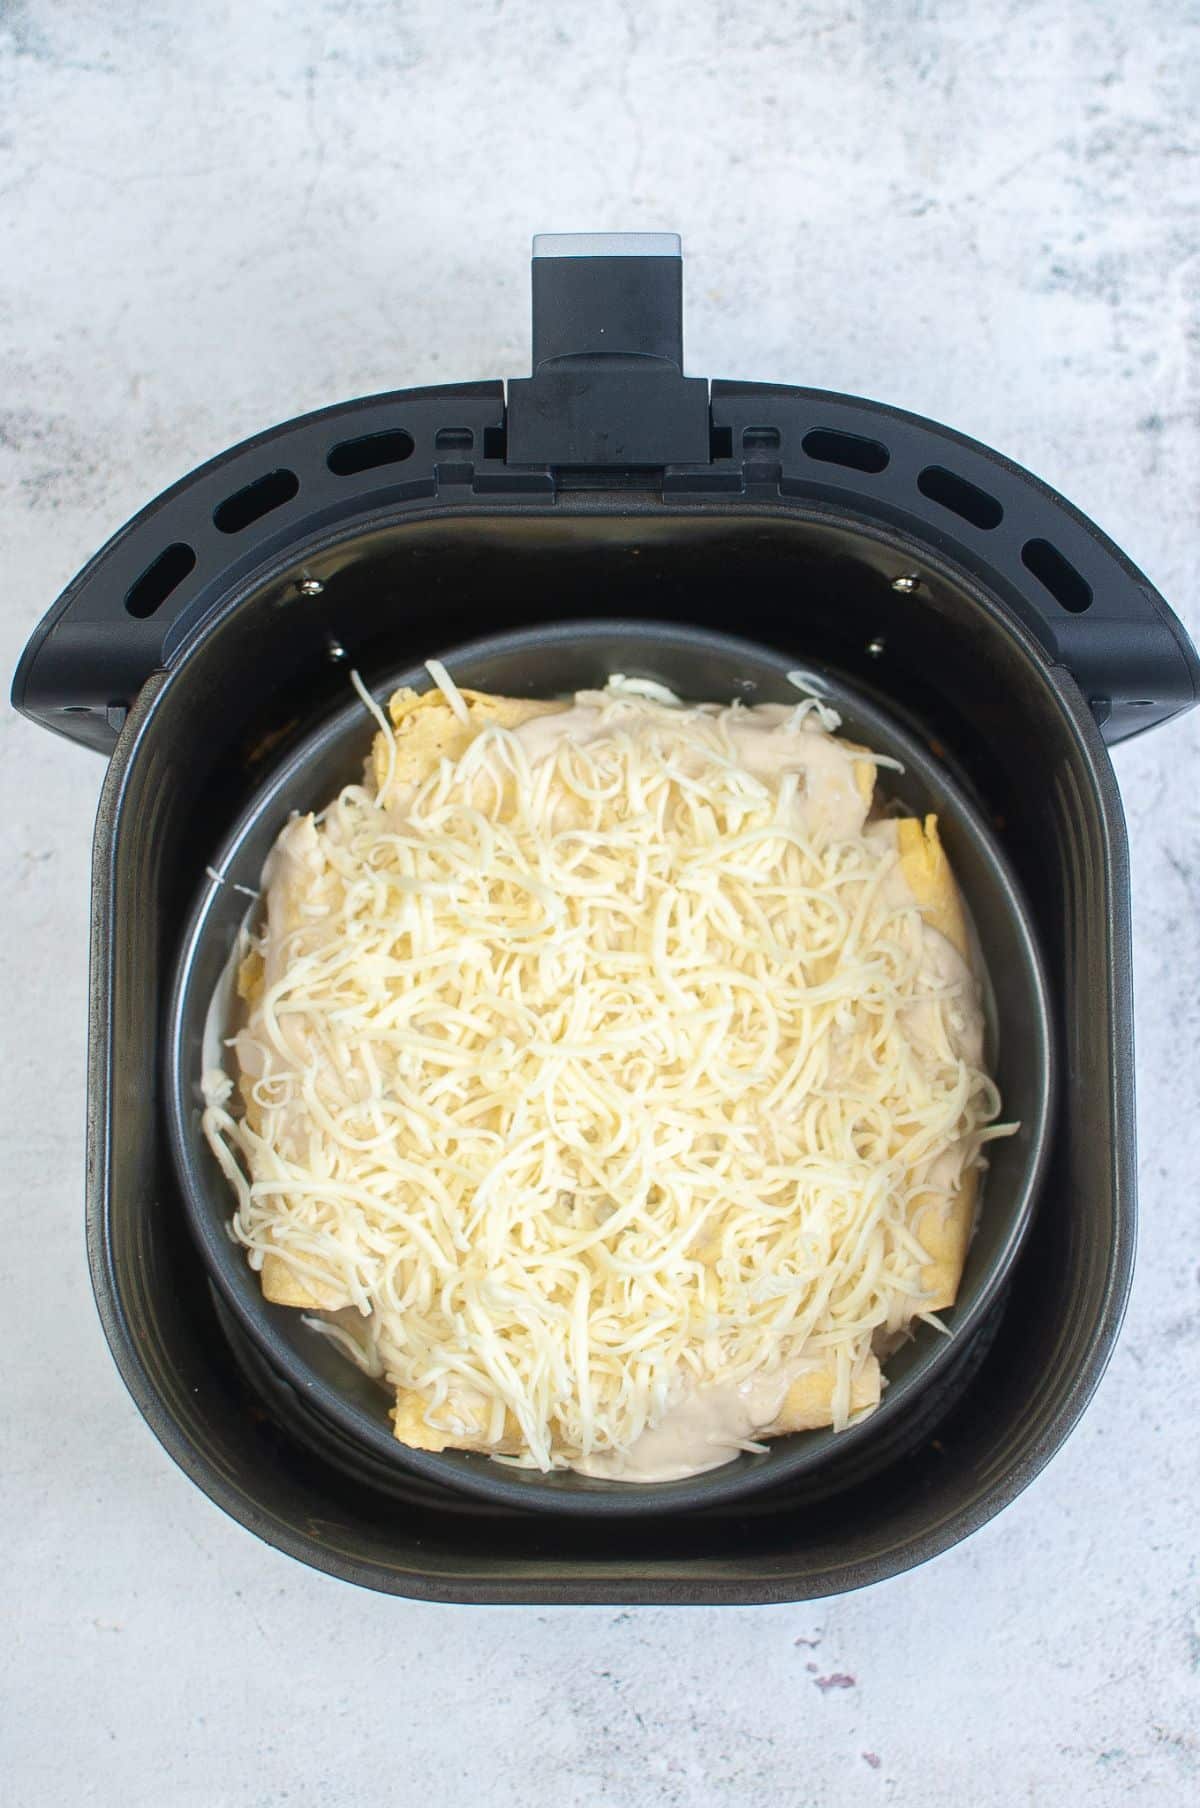 Rolled tortillas with cheese and green enchilada sauce in Air Fryer.